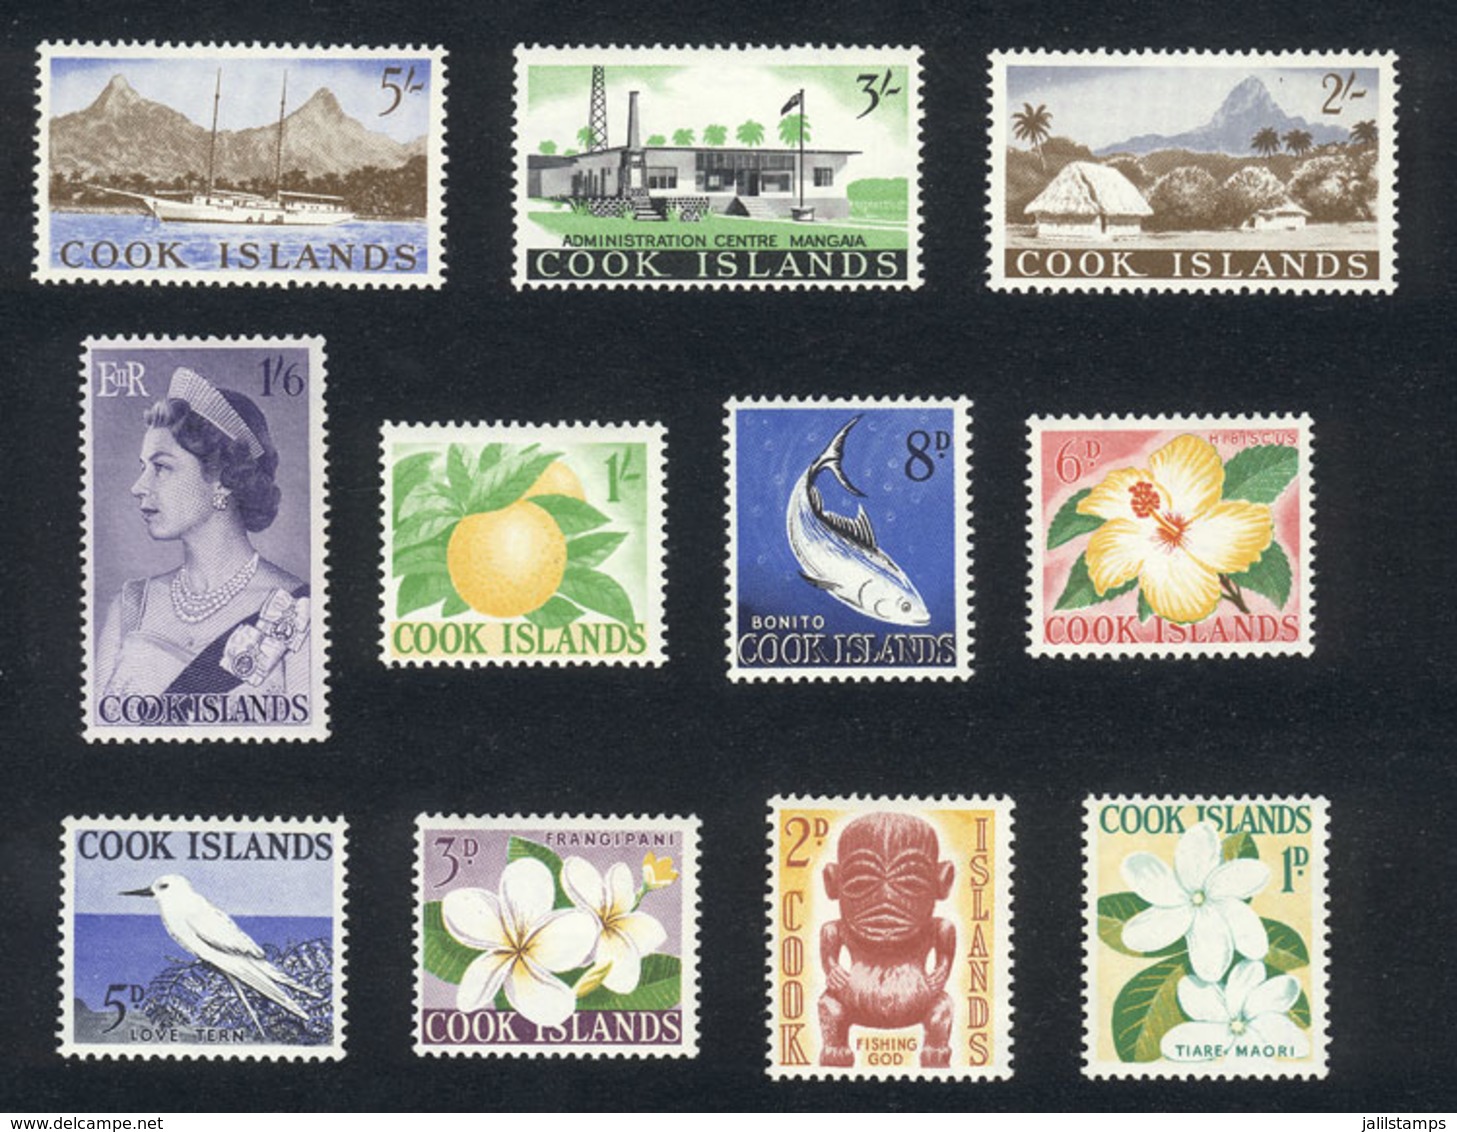 COOK ISLANDS: Yvert 89/99, Ships, Birds And Flowers, Complete Set Of 11 Values, Very Fine Quality! - Cook Islands